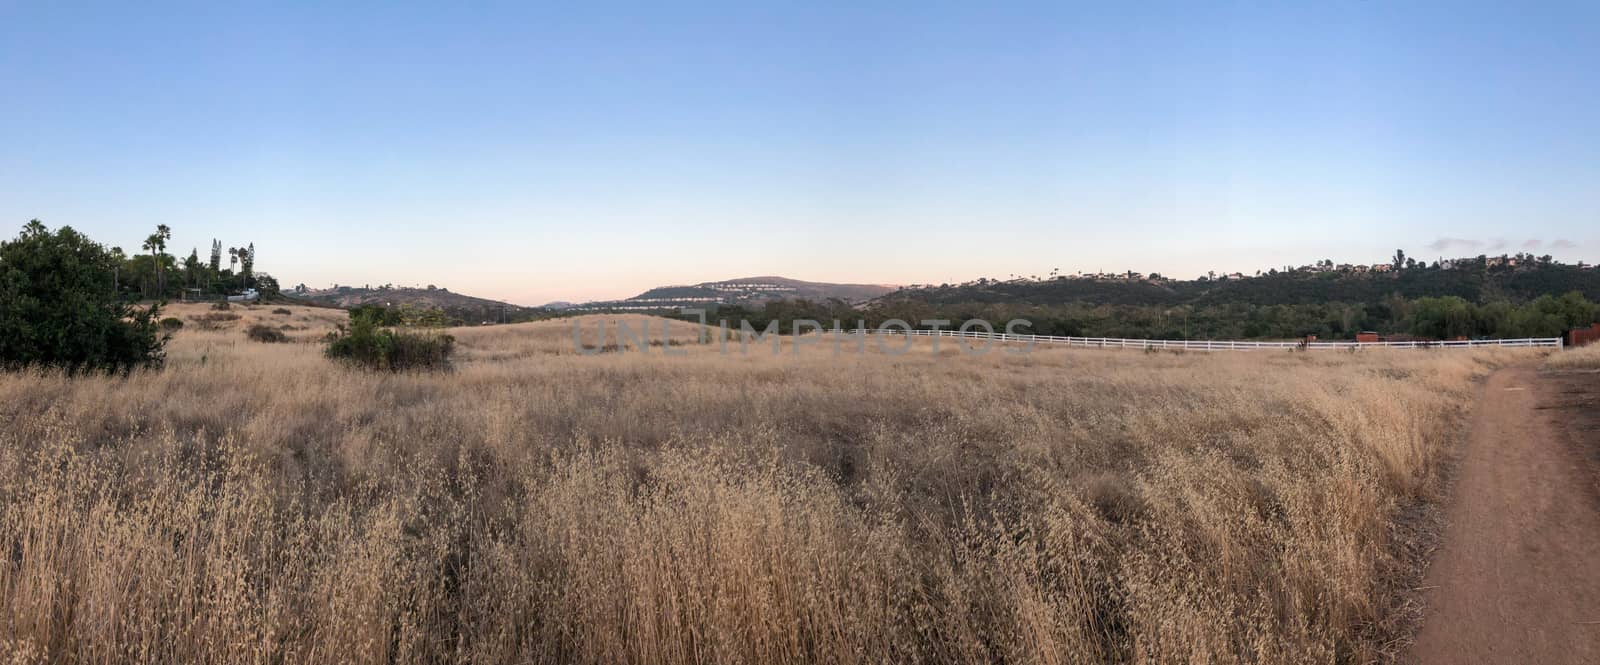 Dry grass and wheat field meadow during sunset. by Bonandbon